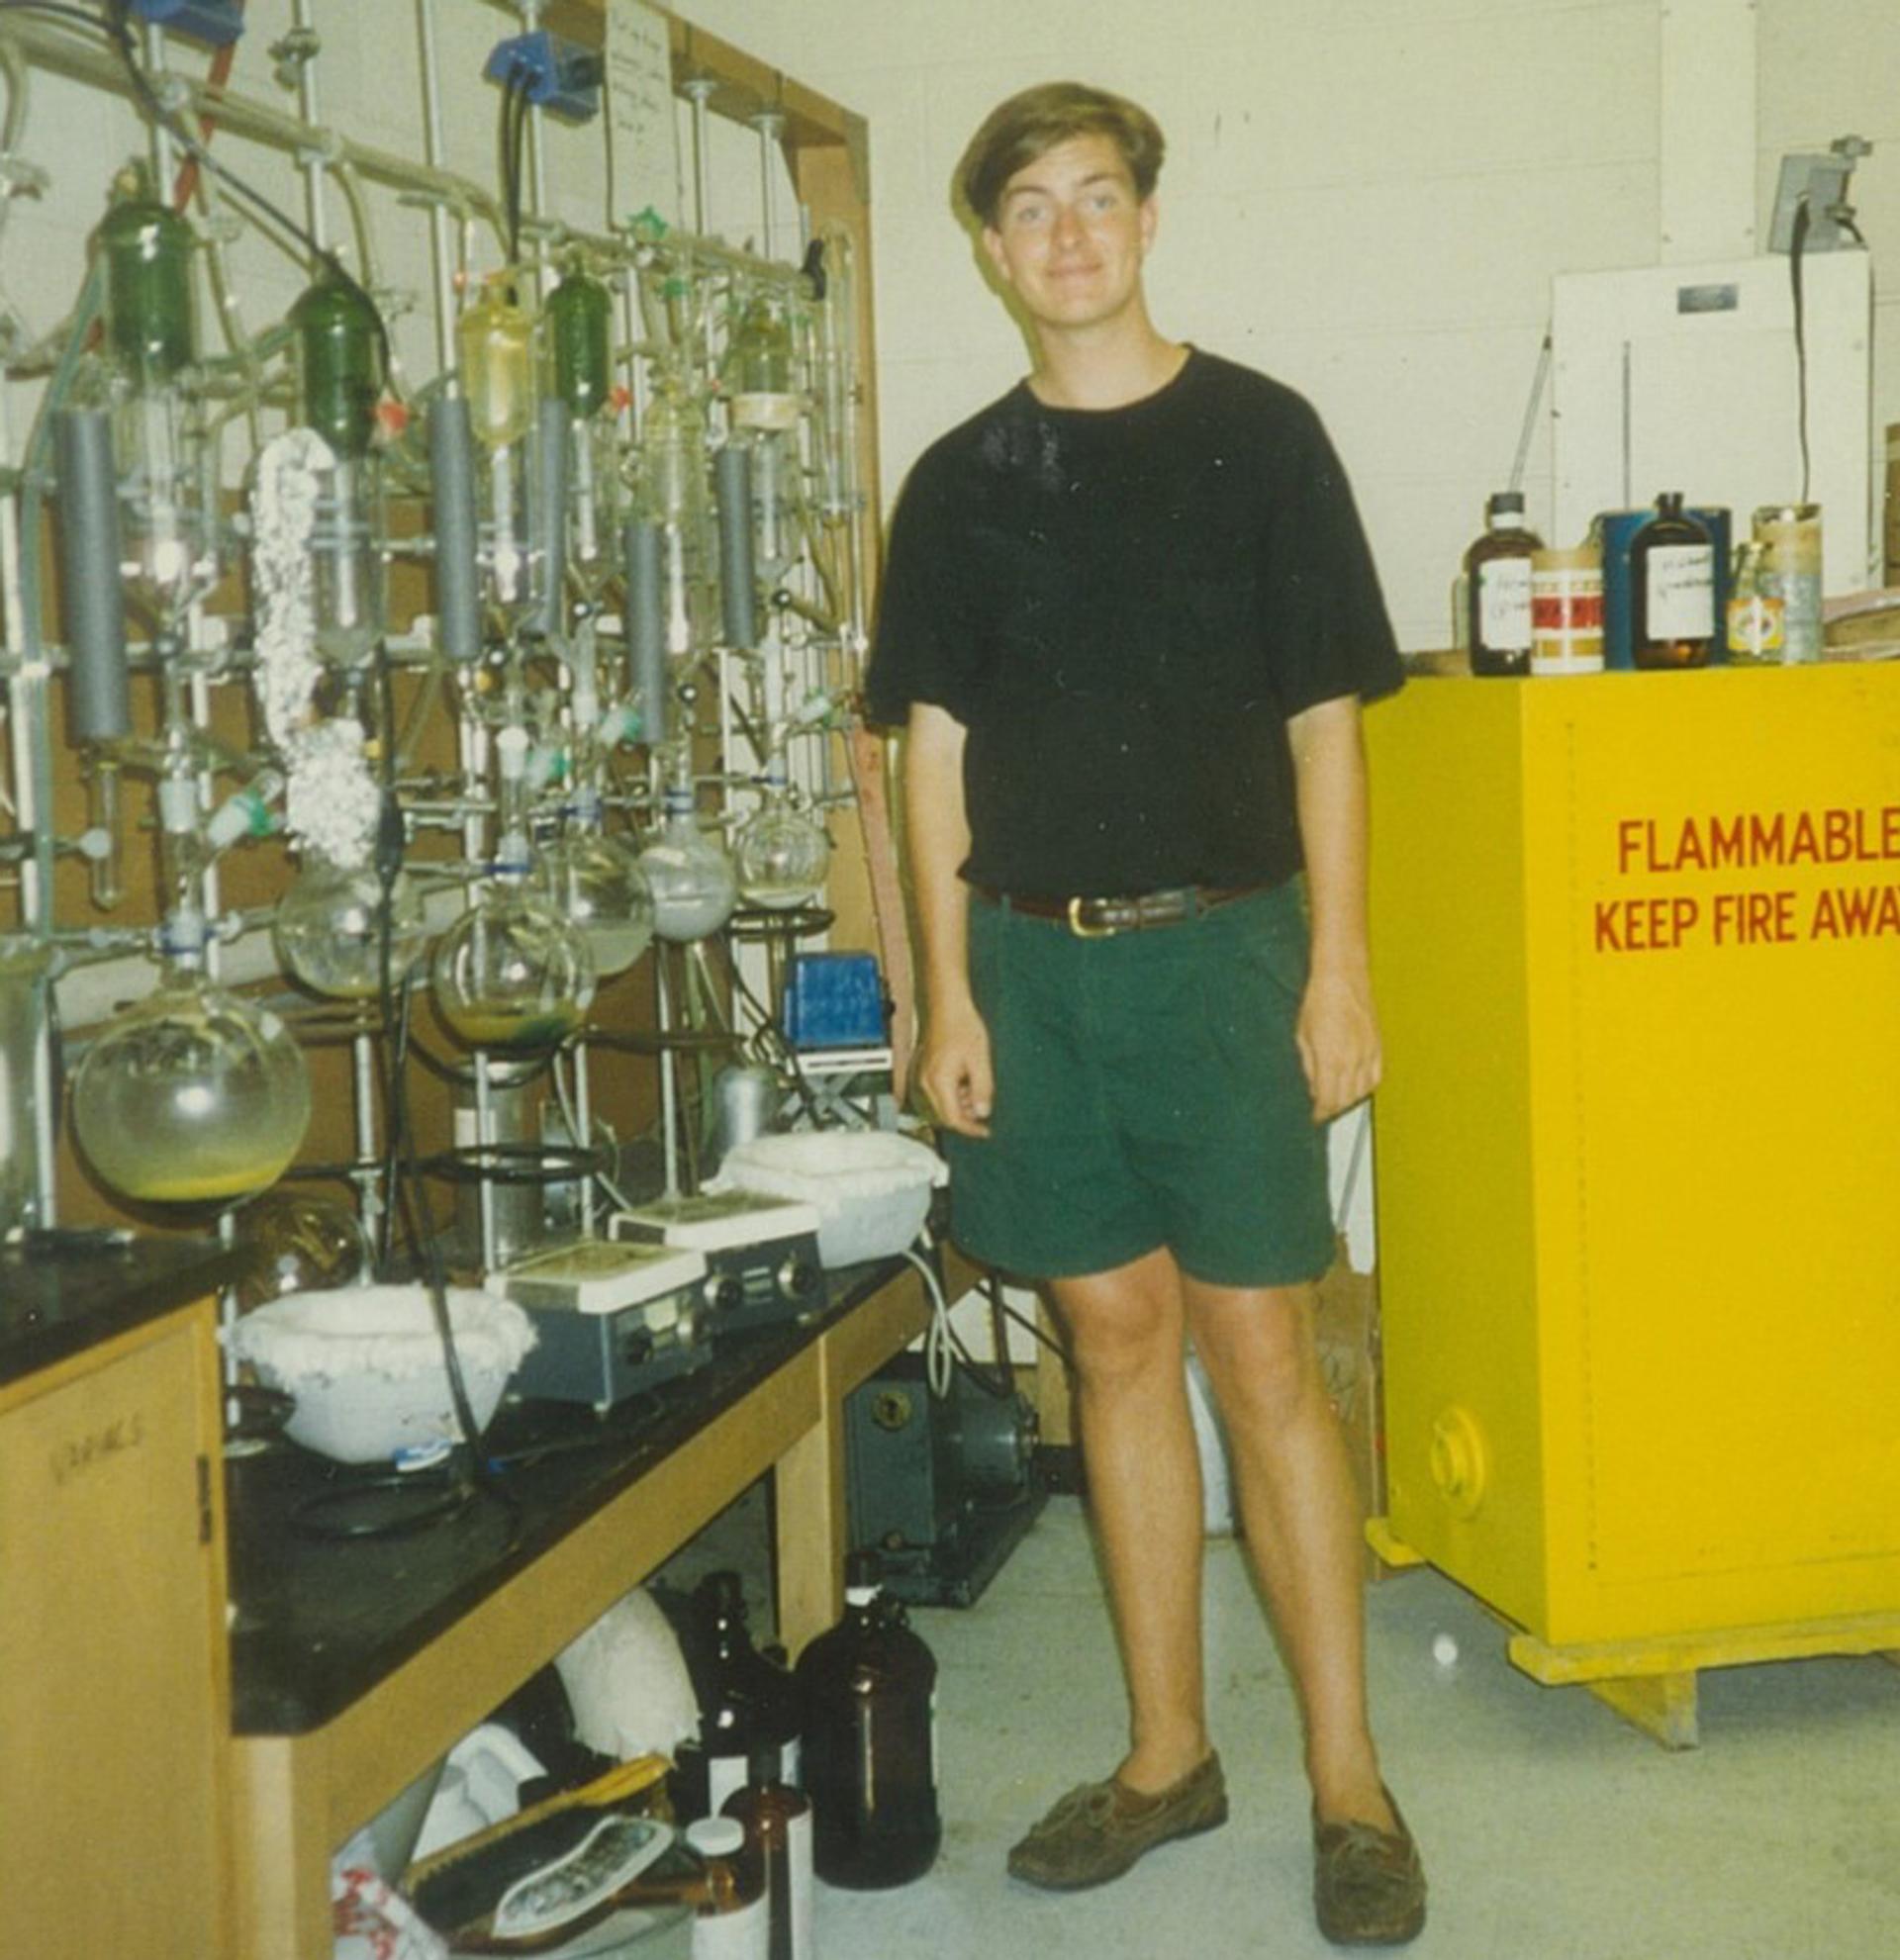 After my first year at the University of Toronto, I was fortunate to be awarded a summer research internship in the inorganic chemistry lab of Prof. Robert Morris. I relished the opportunity to pursue open-ended investigations.